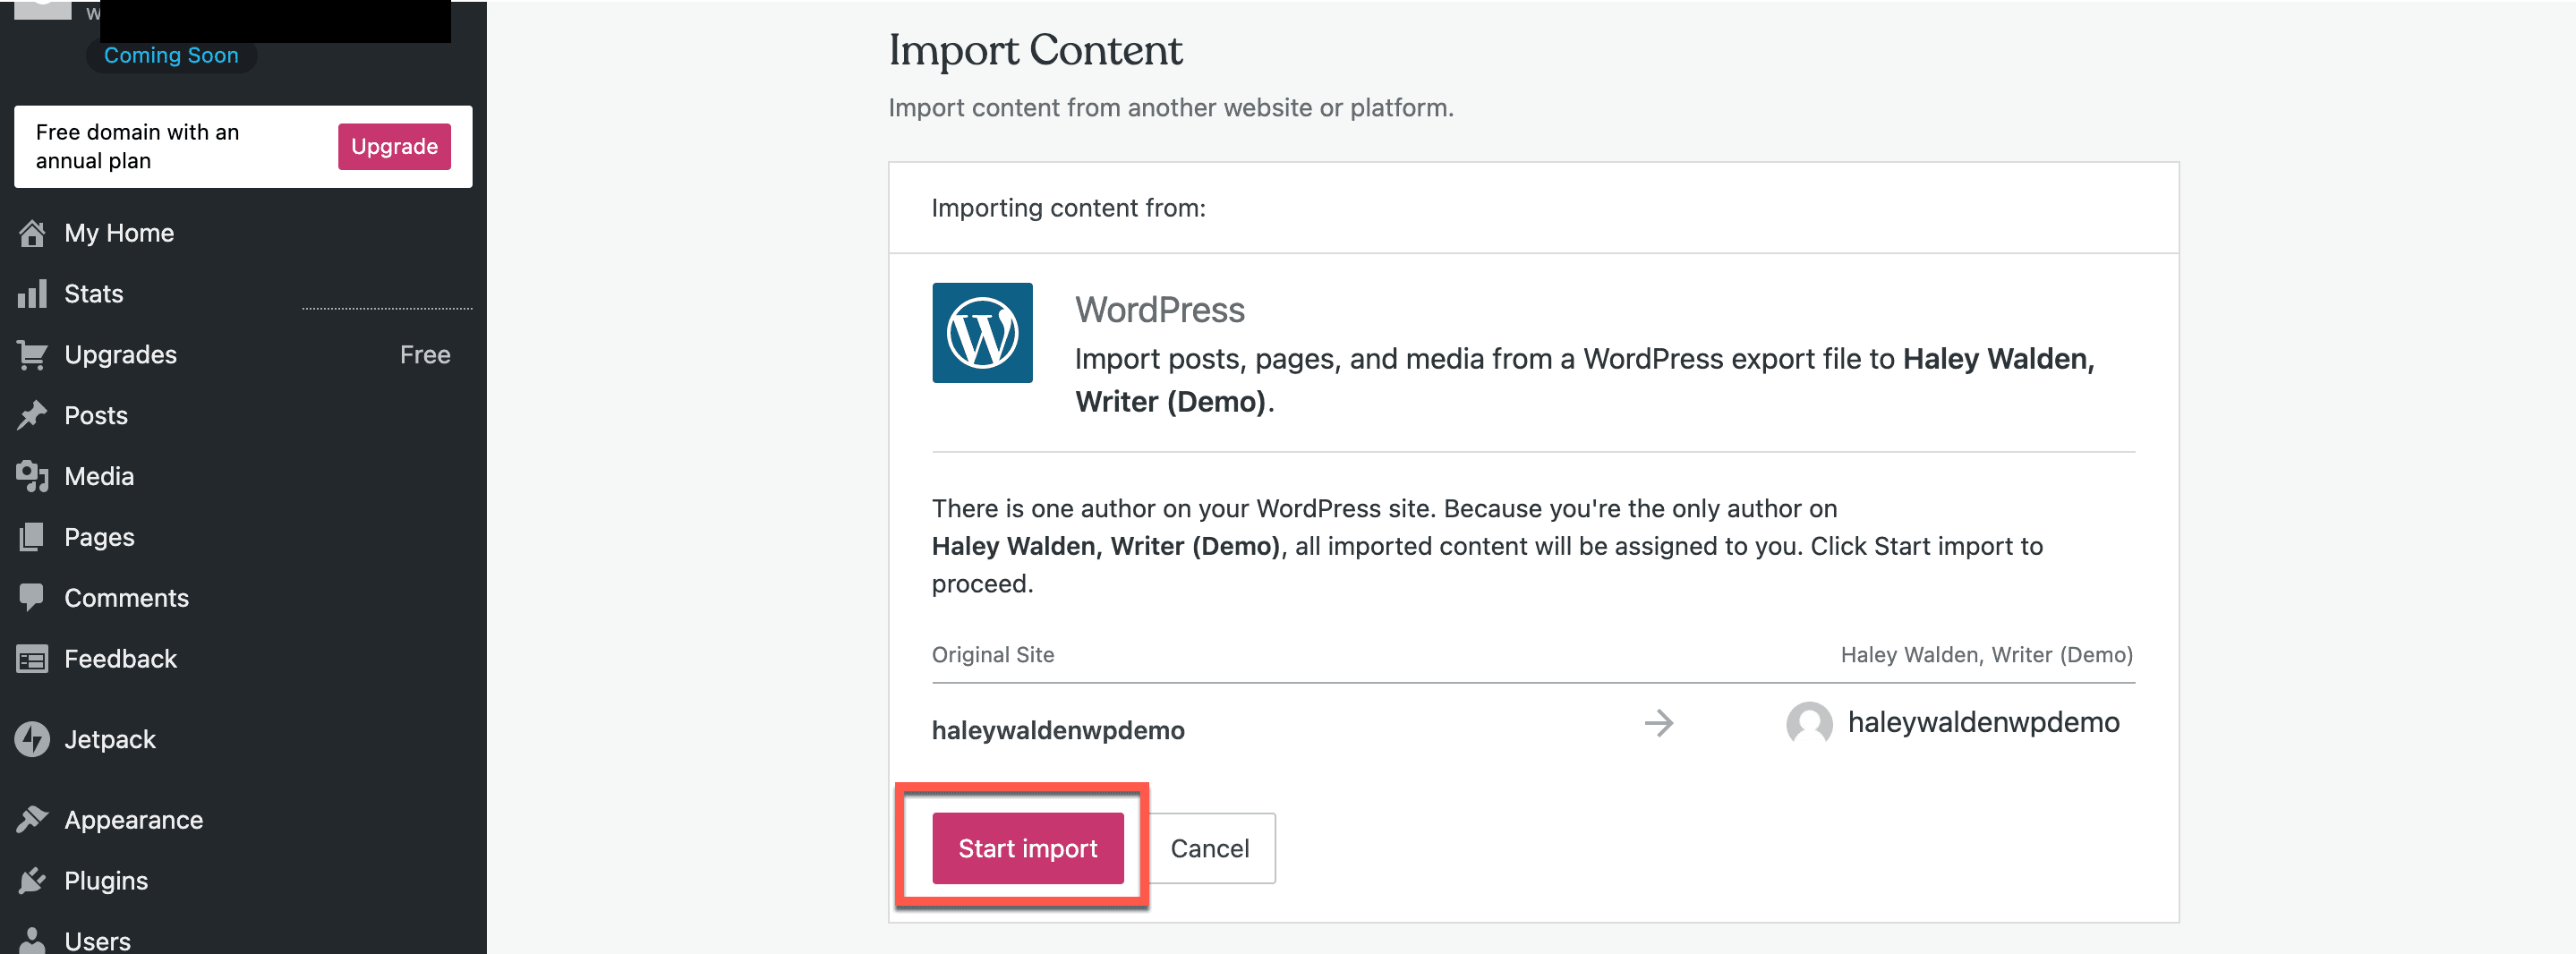 How to Use the WordPress Export Tool 11